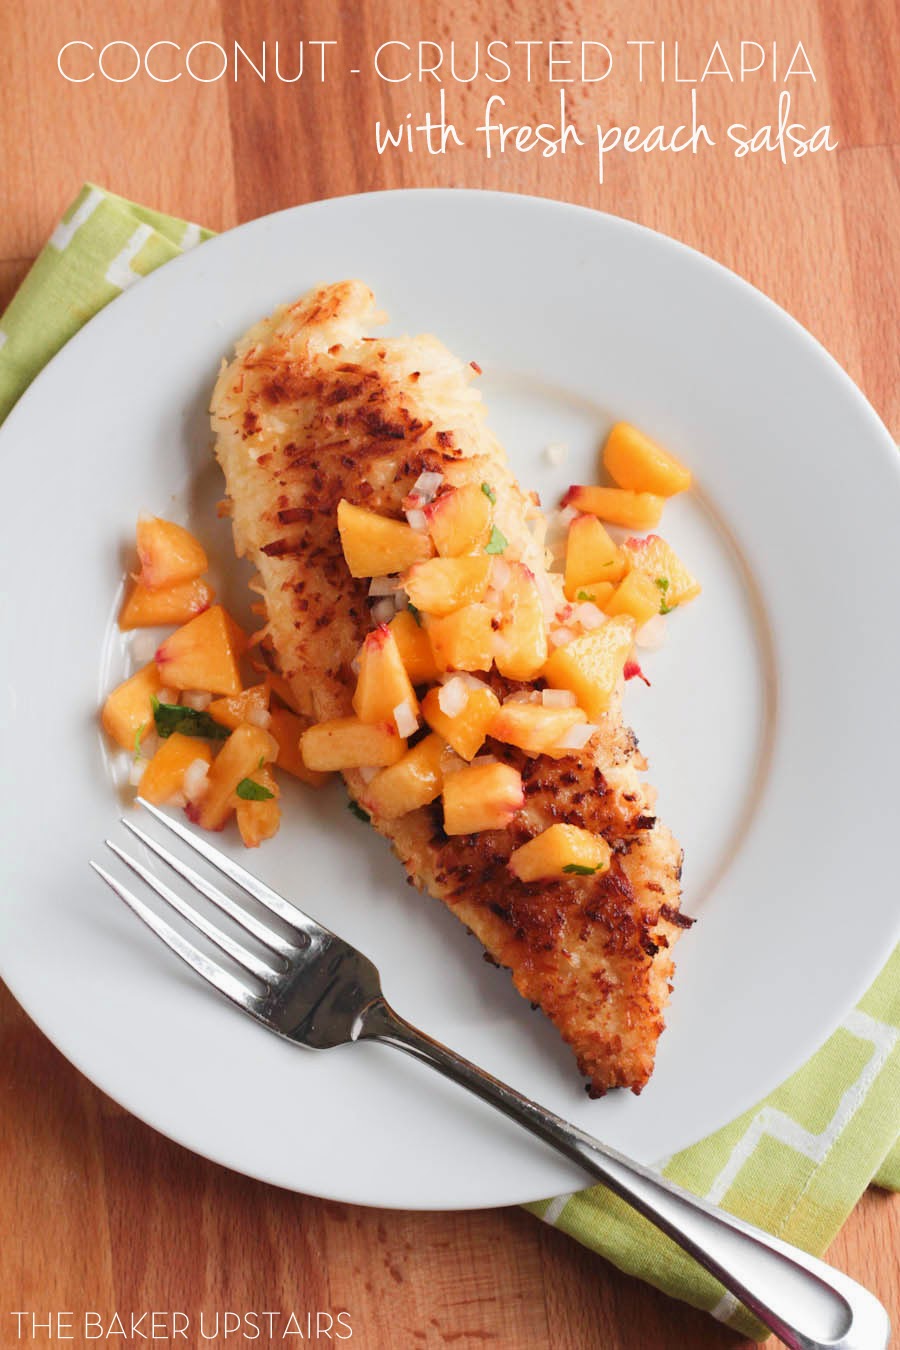 This coconut-crusted tilapia with fresh peach salsa is a super easy and flavorful dinner, and ready in just a few minutes!